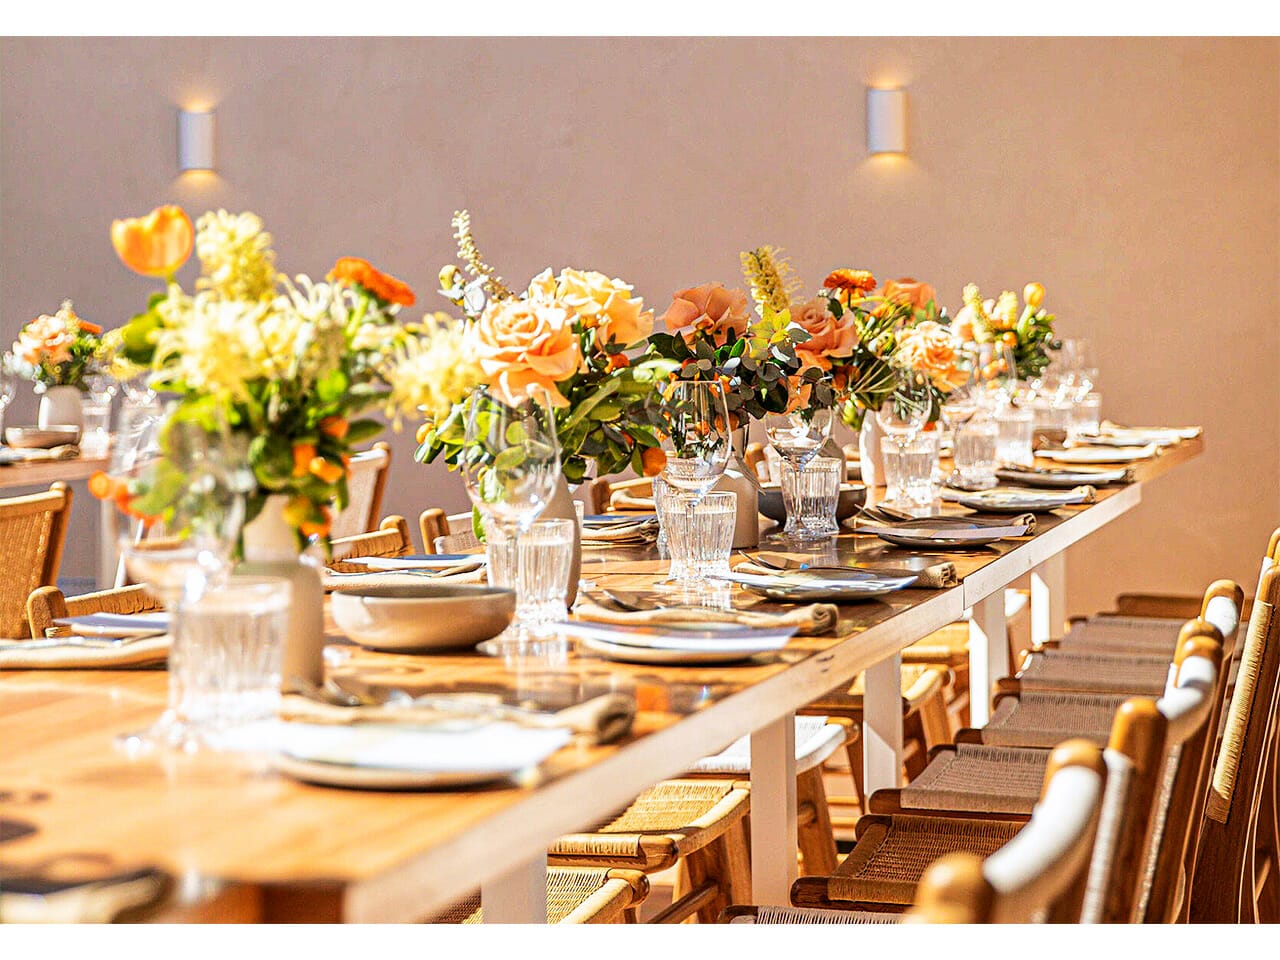 Long table setup for an event